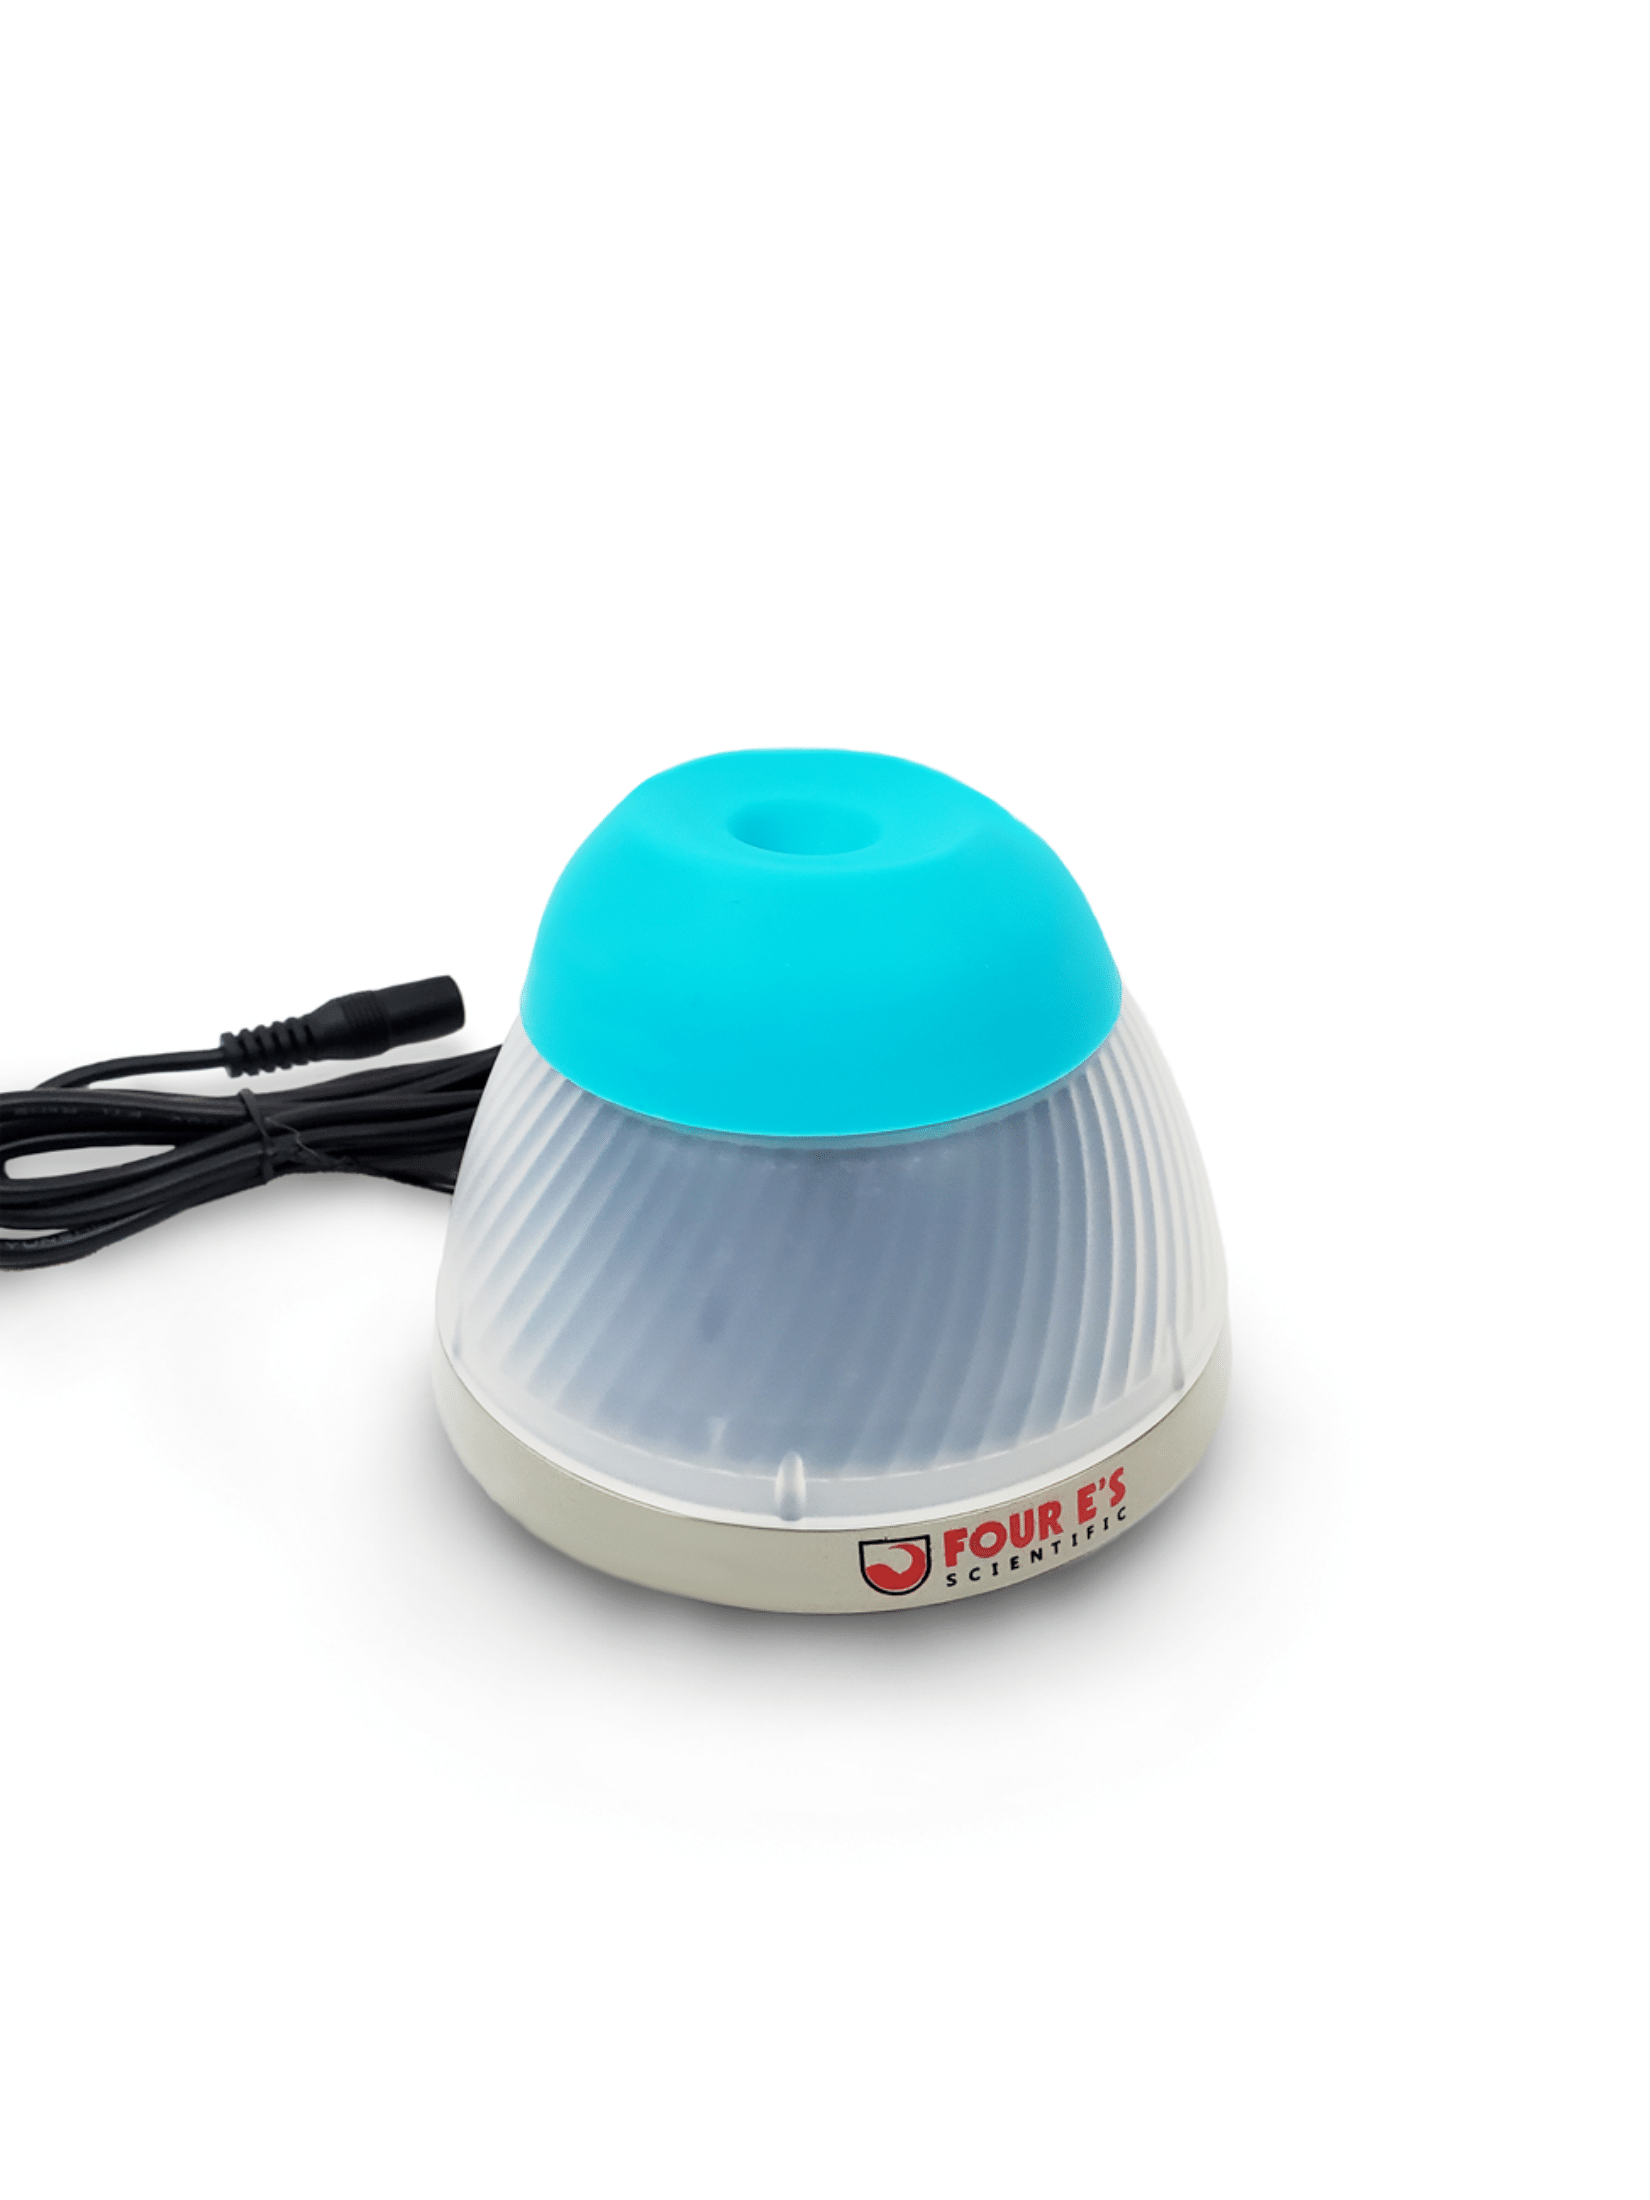 https://www.eklabsupply.com/cdn/shop/products/four-e_s-orbital-mini-vortex-mixer-turquoise-front.png?v=1660855505&width=1946